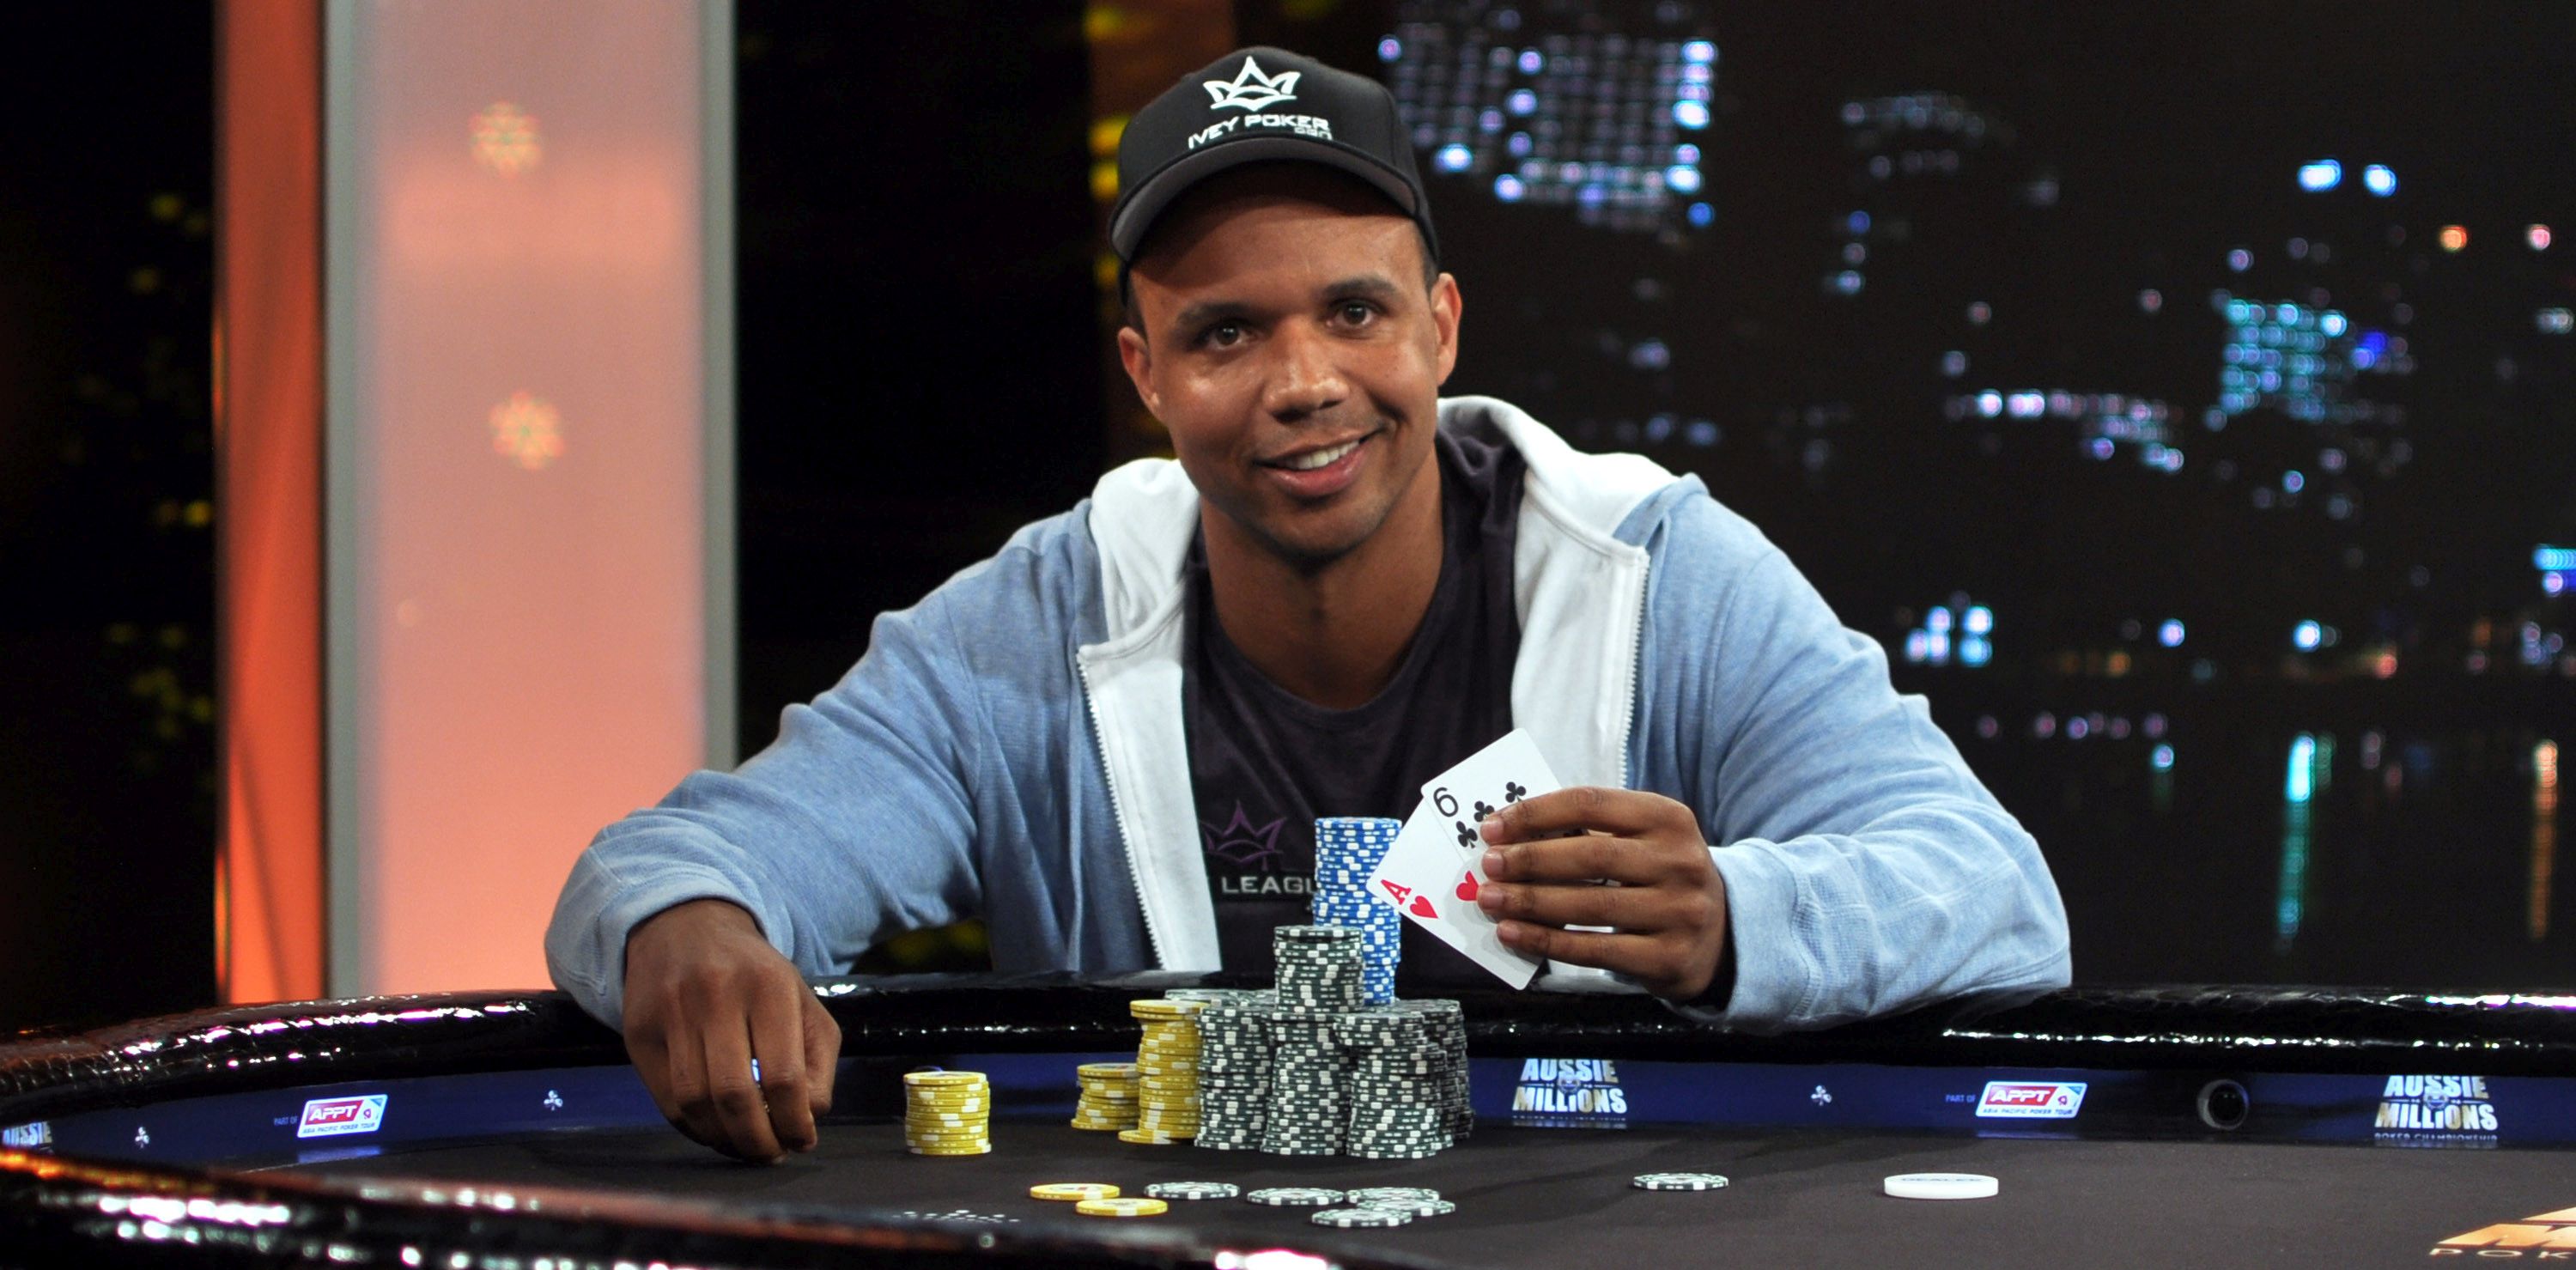 Phil Ivey Net Worth, Bio, Wiki, Age, Family, Friends, Height & Salary